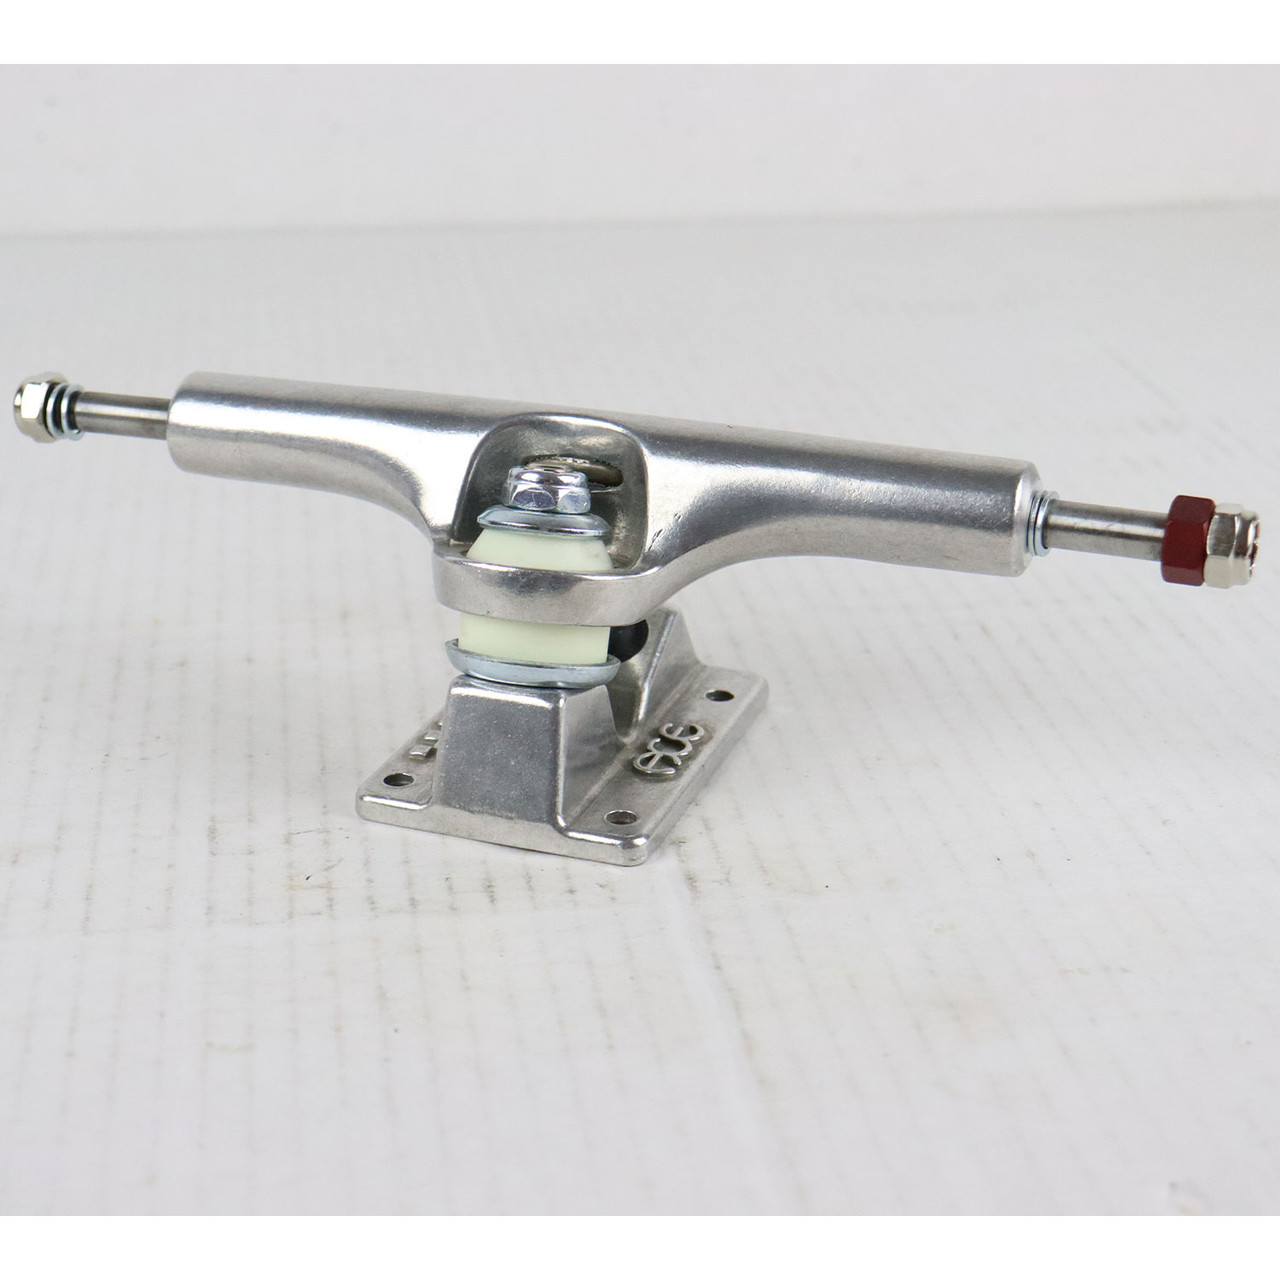 Blemished Ace Skateboard Trucks AF1 Silver 66 (9.0" Axle) FOR SMALL PARTS ONLY - TGM Skateboards